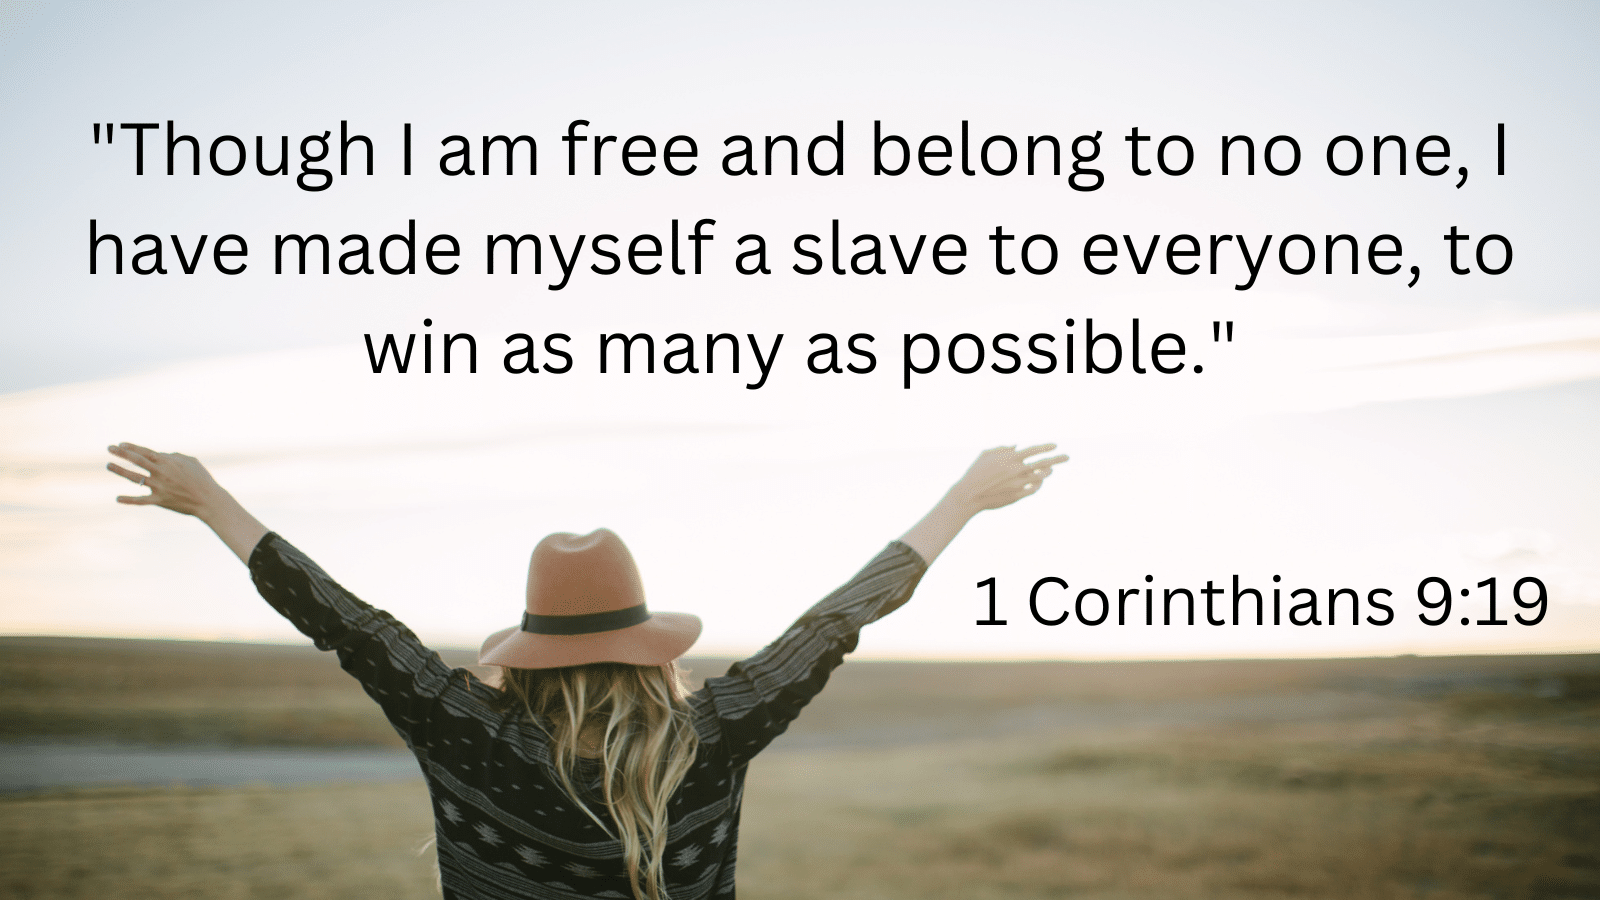 Woman with raised hands in a field with 1 Corinthians 9:19